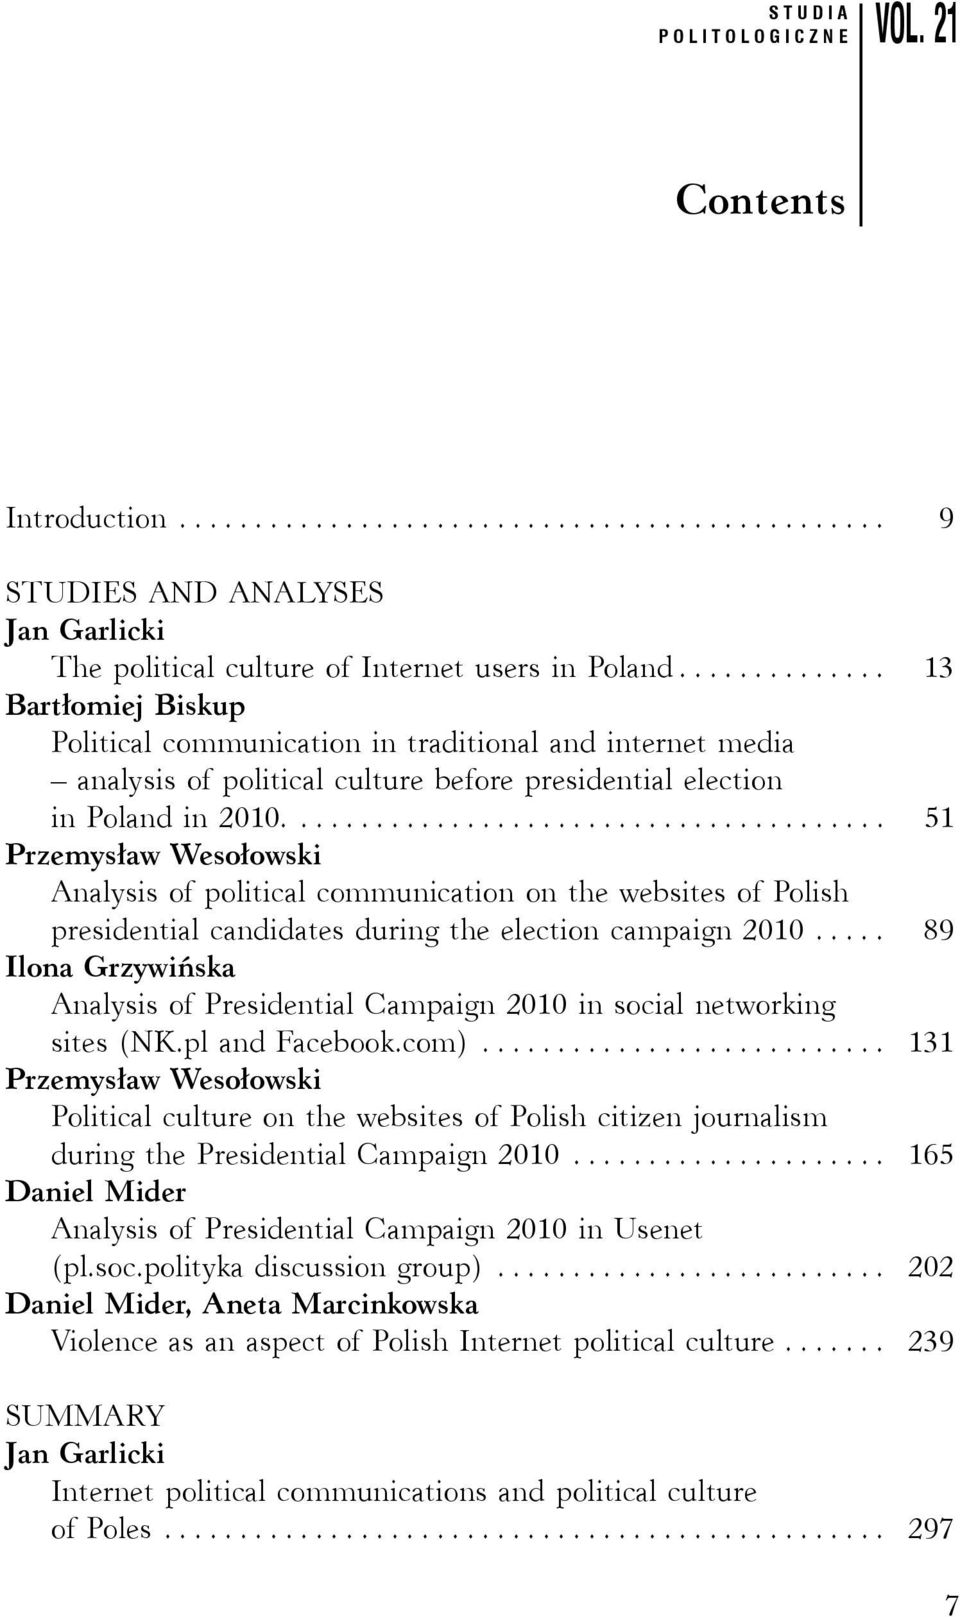 ....................................... 51 Przemysław Wesołowski Analysis of political communication on the websites of Polish presidential candidates during the election campaign 2010.